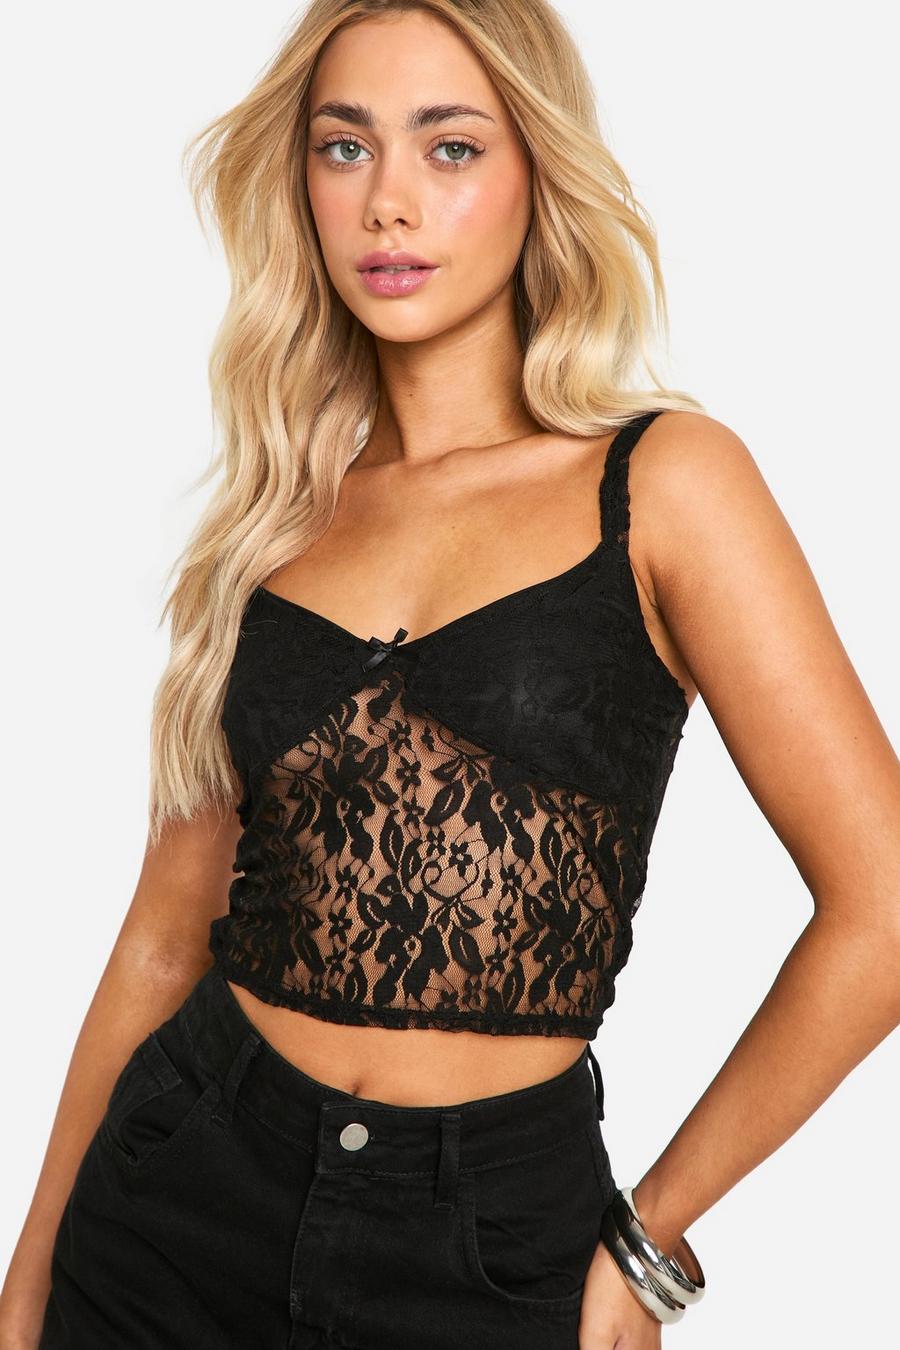 Black Lace Top With Bow Detail Cami